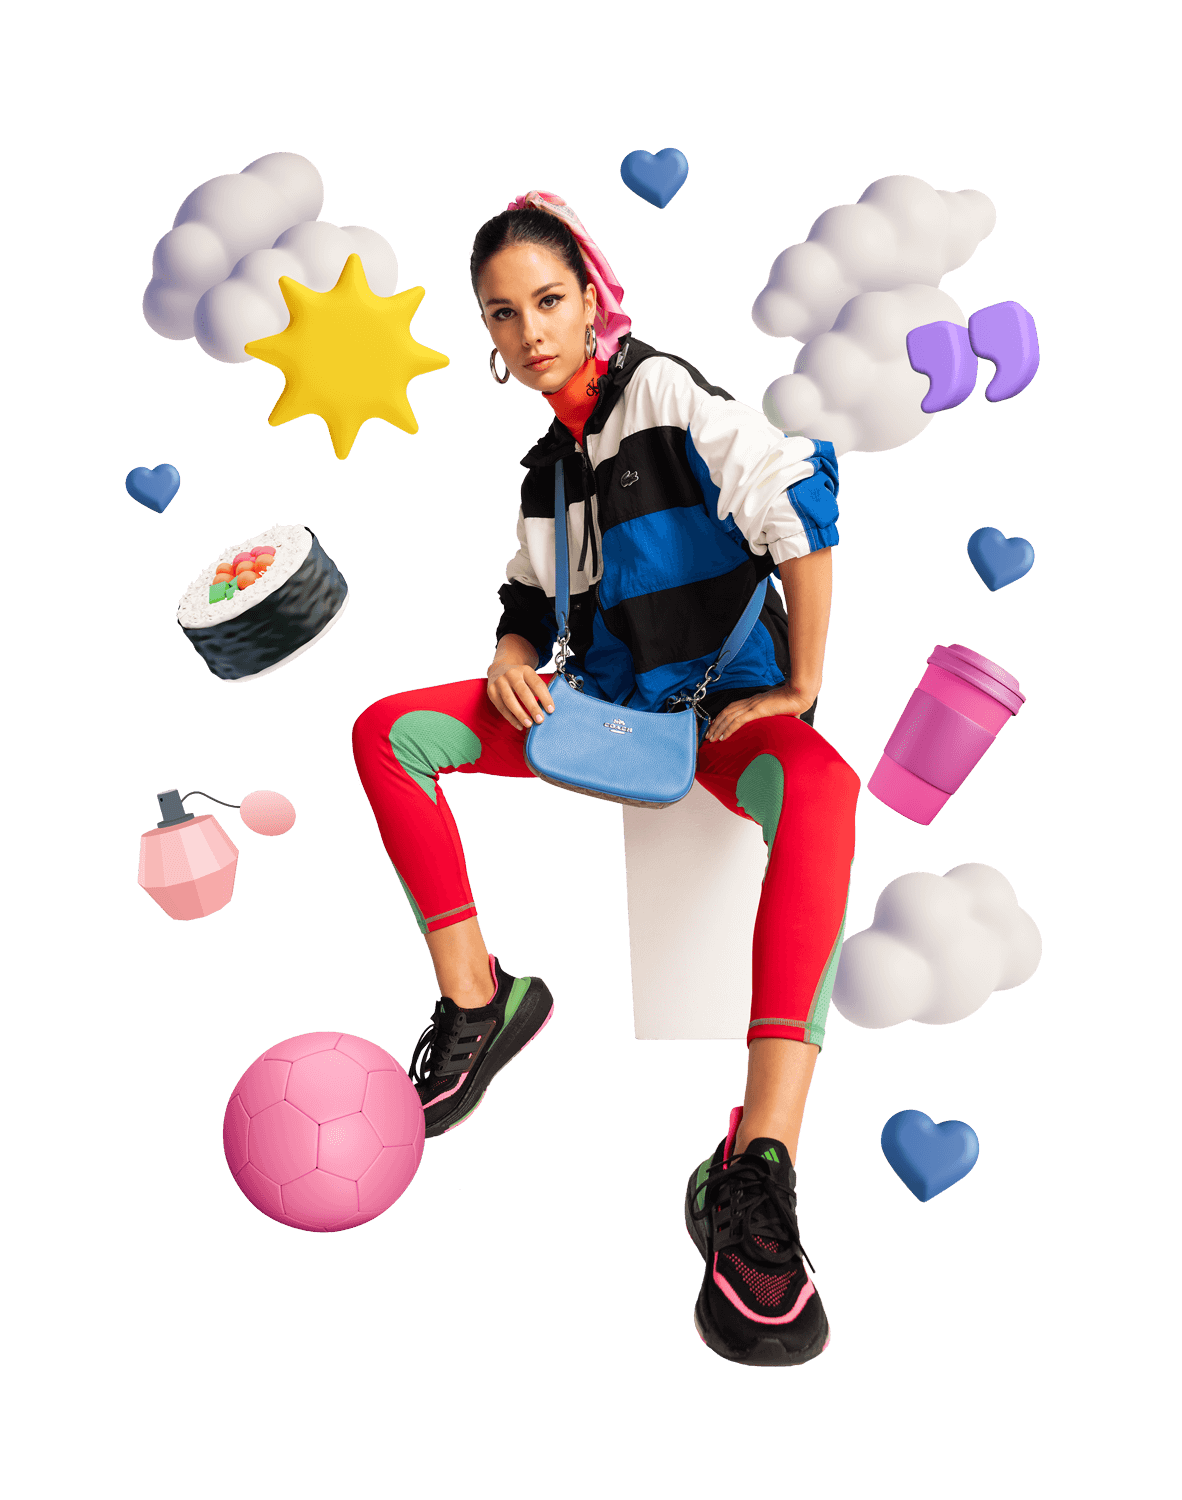 Photo of a person wearing a Lacoste jacket, adidas shoes, and a Coach handbag. There are several fun 3D oversized objects rendered around the person, including a sun, a piece of sushi, a takeaway coffee cup and love hearts.